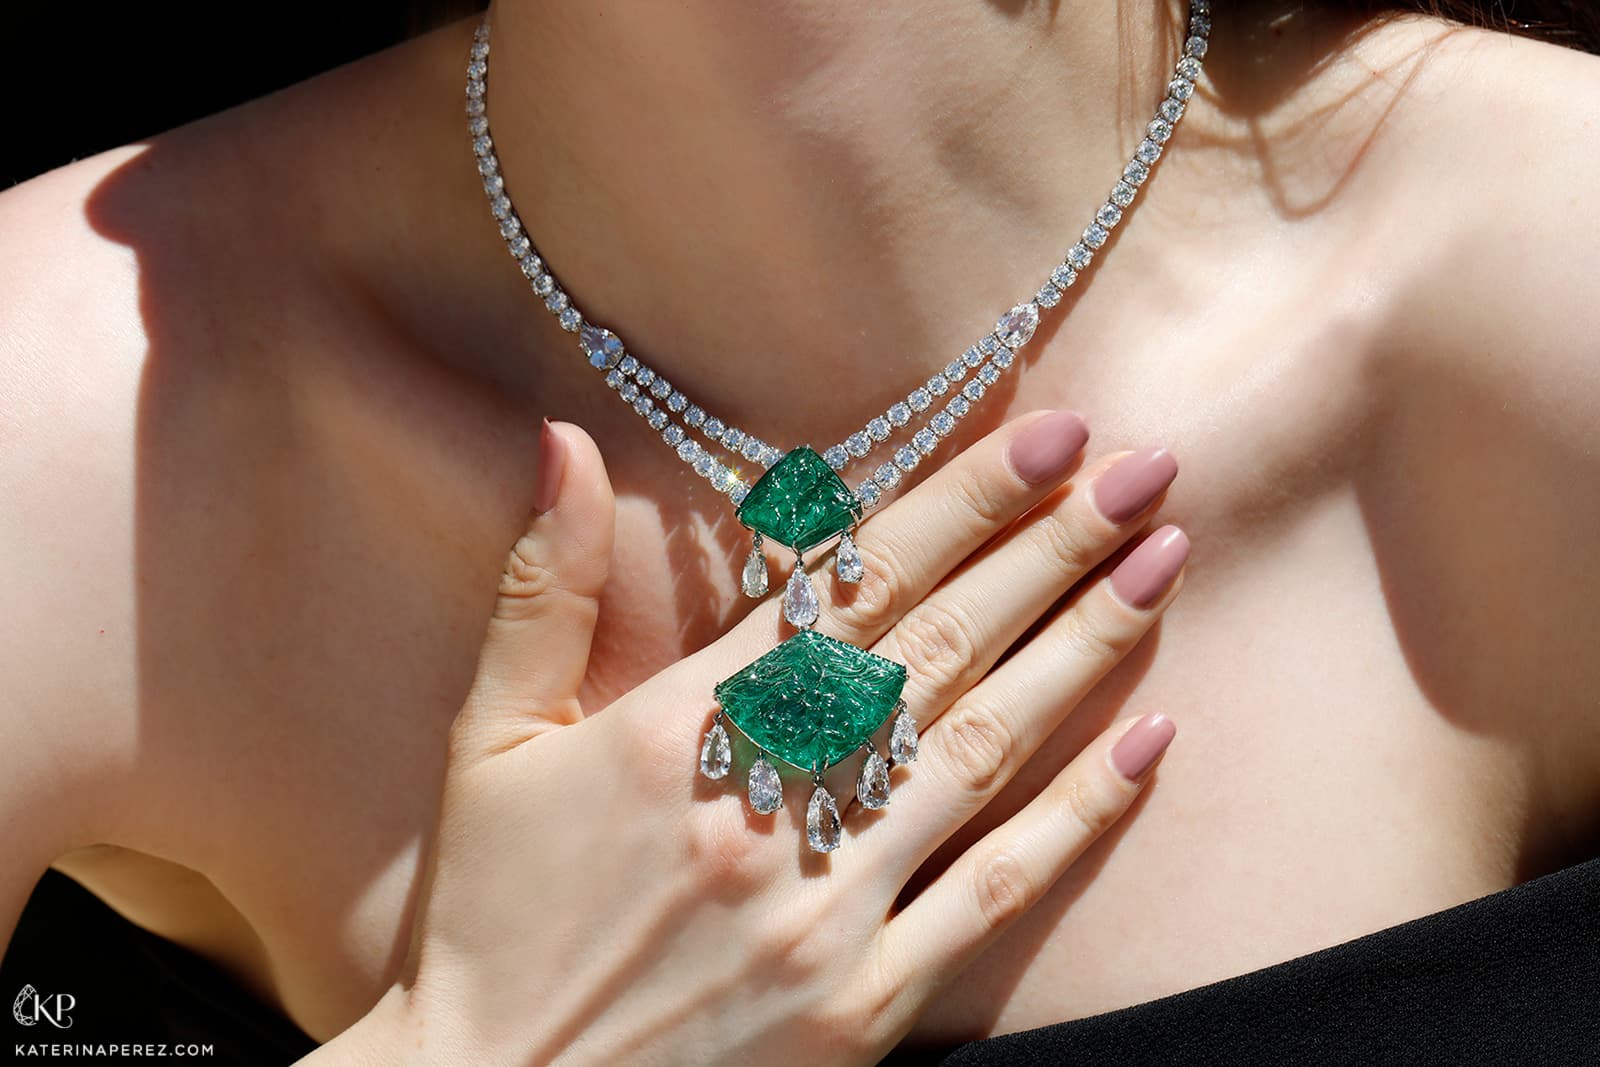 Bayco necklace with carved Zambian emeralds, brilliant and pear cut diamonds in 18k white gold